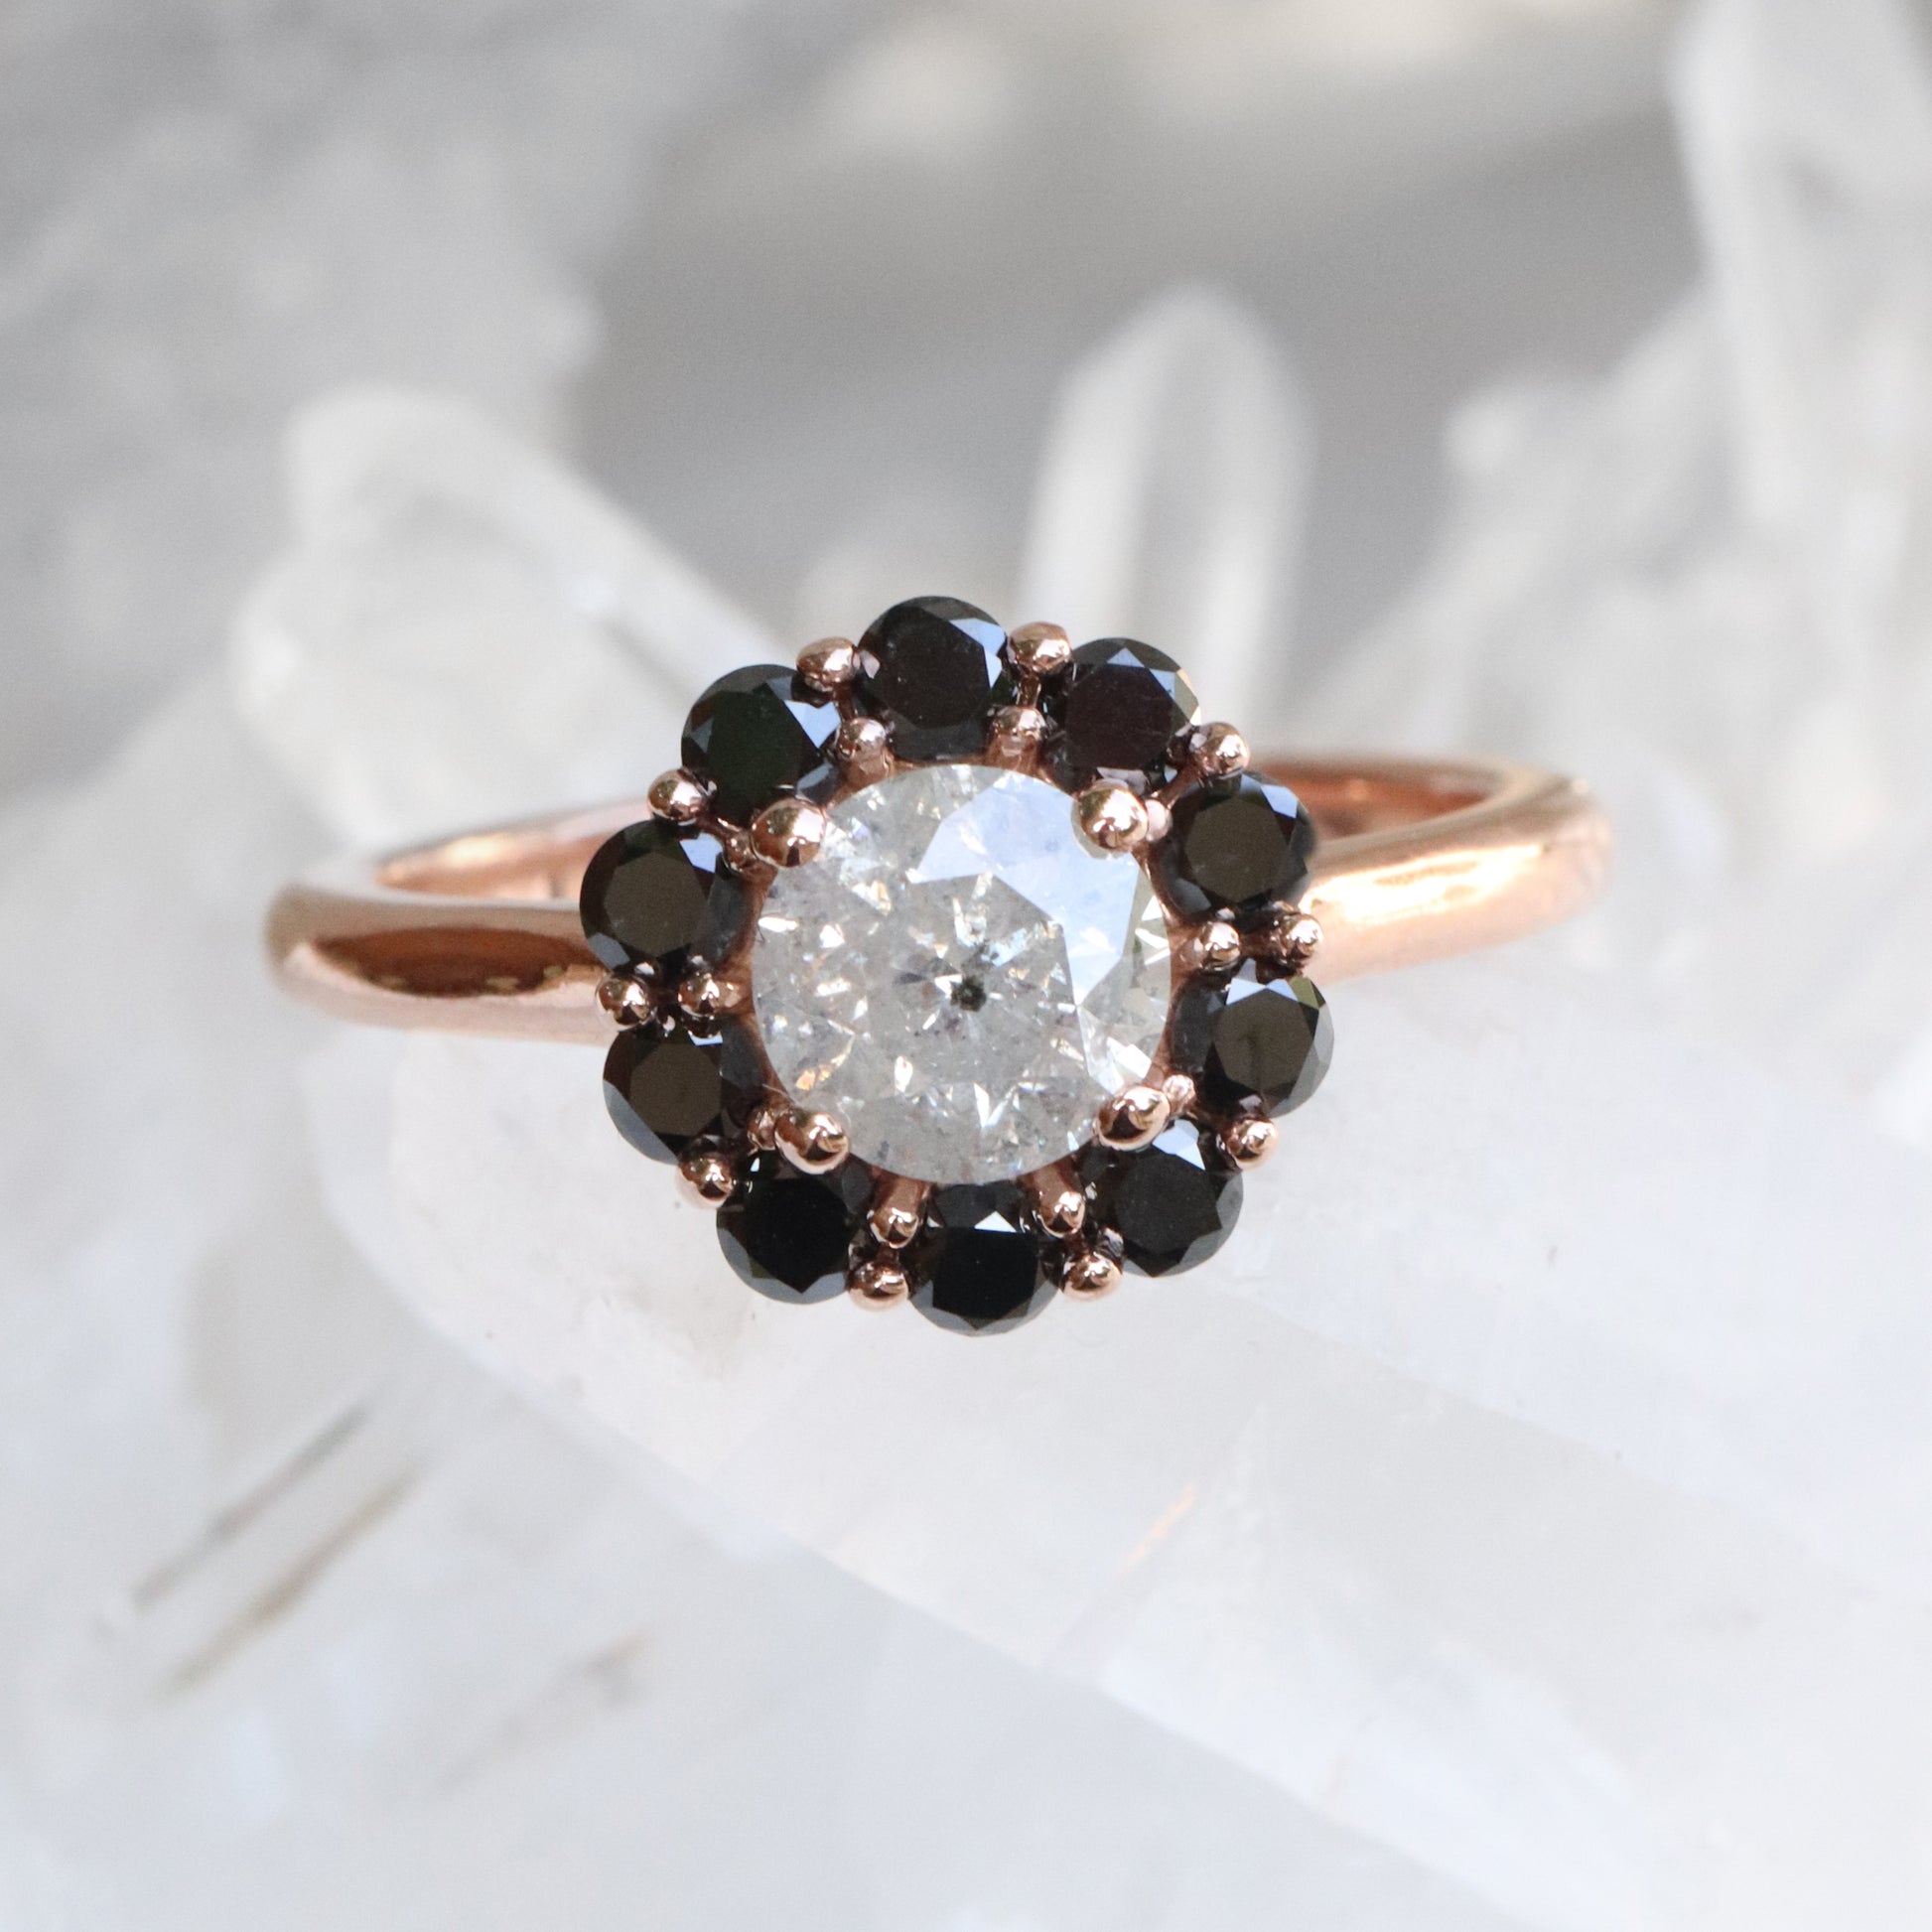 Magnolia Ring with a .70 ct Misty Celestial Diamond and Black Diamond Accents in 14k Rose Gold - Ready to Size and Ship - Midwinter Co. Alternative Bridal Rings and Modern Fine Jewelry